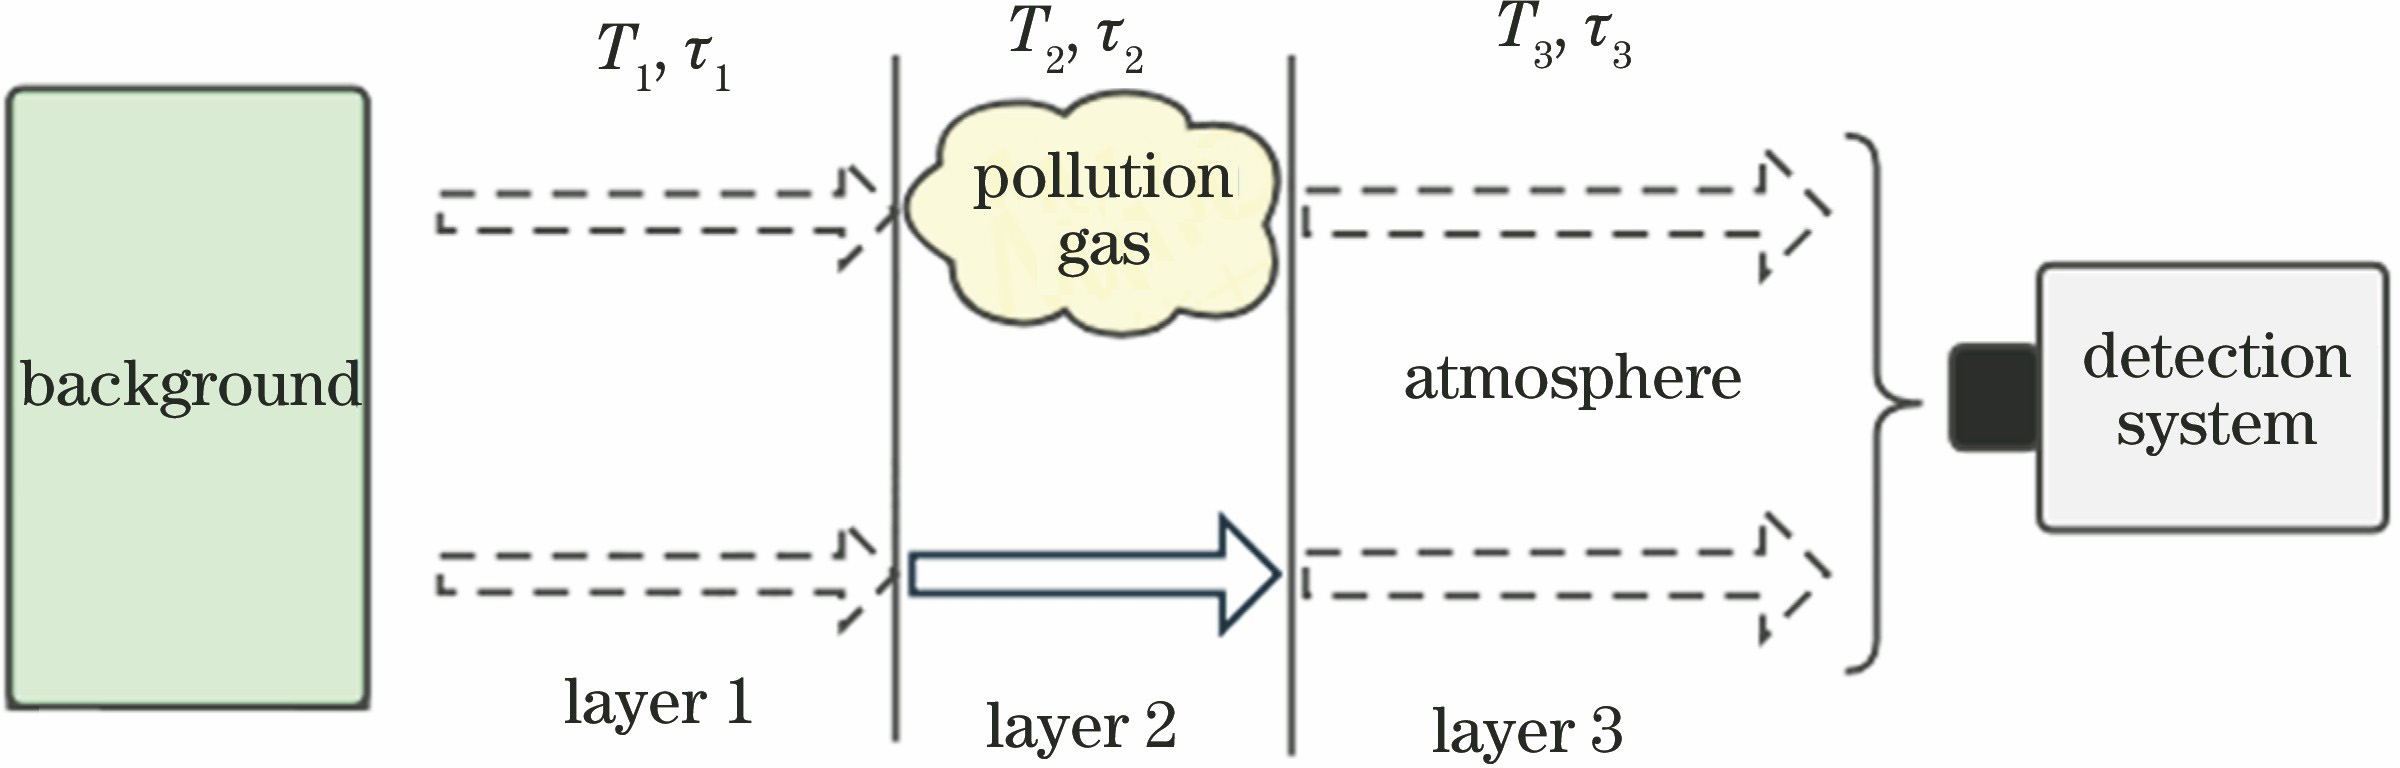 Schematic of passive detection of pollution gases